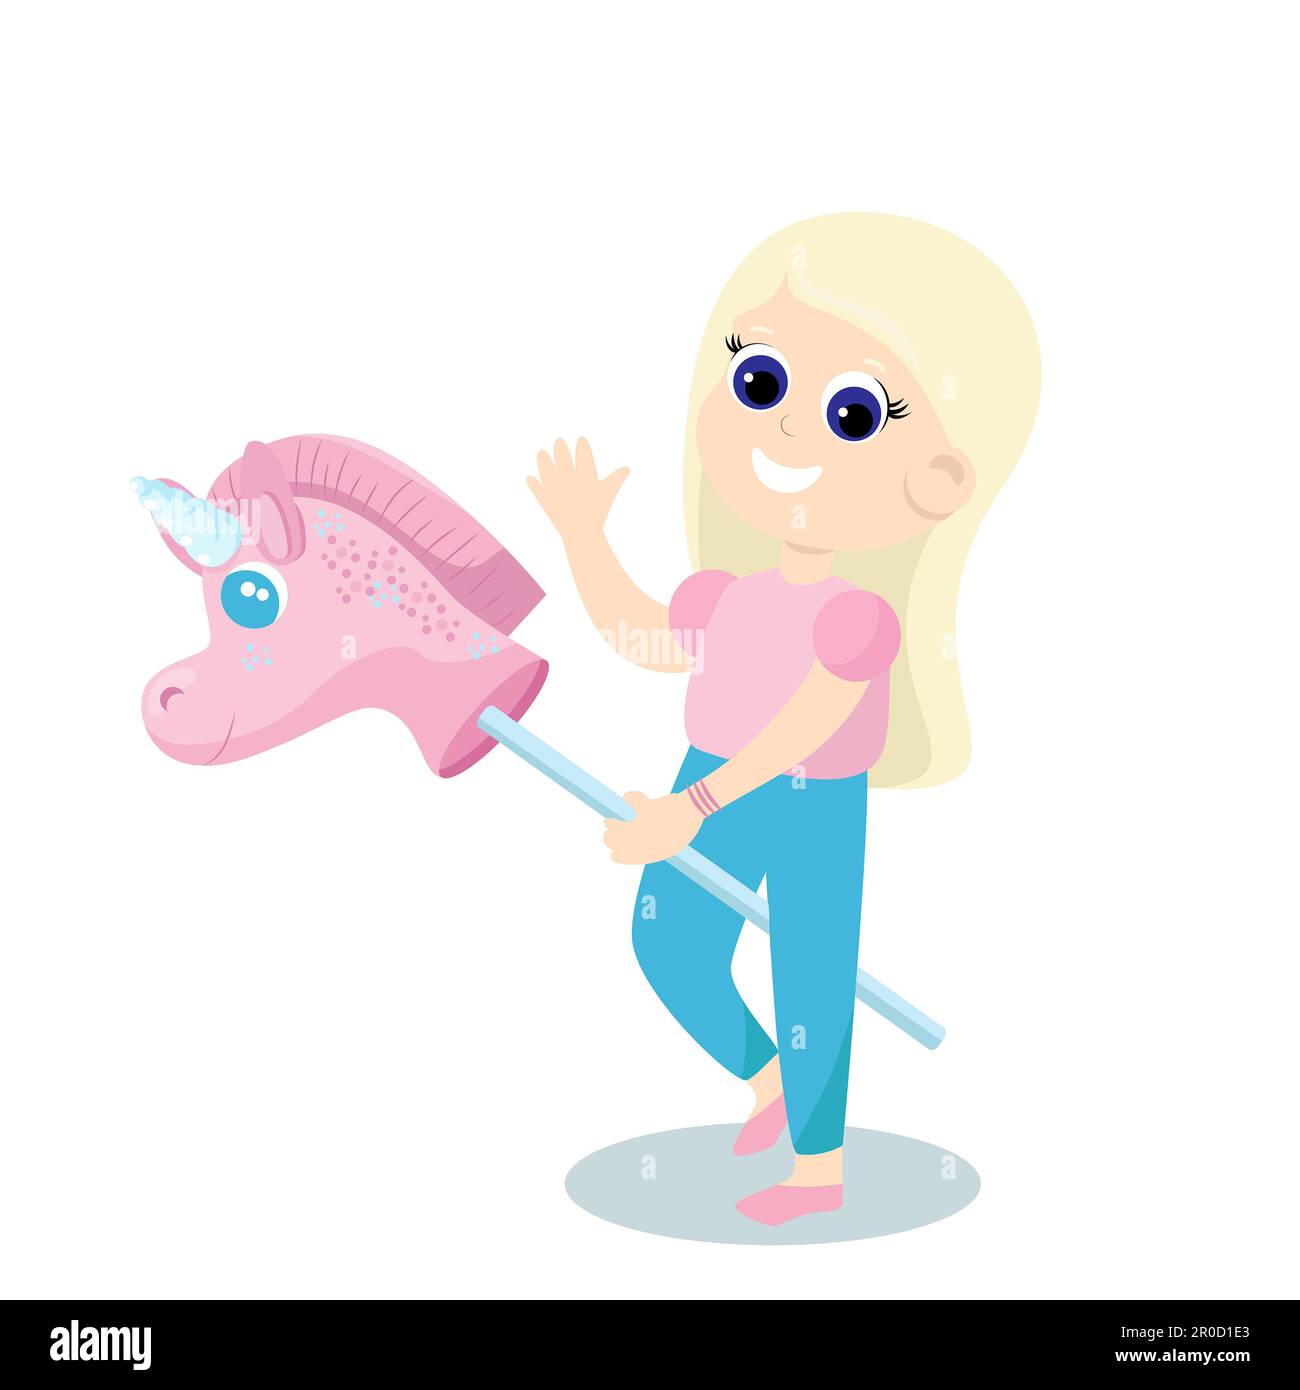 A cute little girl rides a pink unicorn toy on a stick. The girl is very happy, she smiles and waves hello. Stock Photo